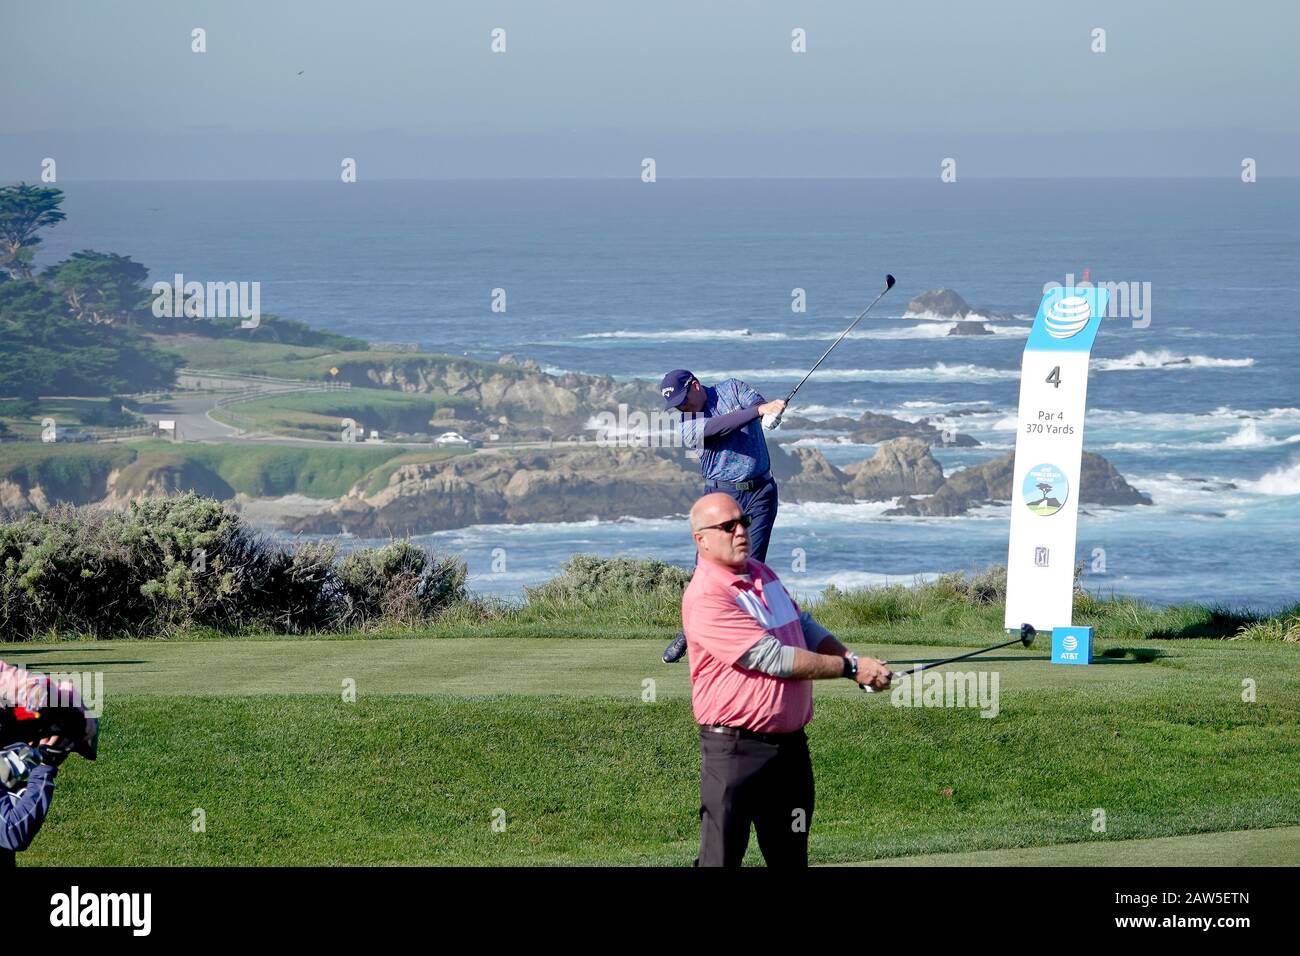 Pebble Beach, USA. 06th Feb, 2020. Monterey, California, USA February 6th 2020 DA Points takes a provisional ball as Michael Lund also swings at Spyglass Hill on the first day of the AT&T Pro-Am PGA Golf event at Pebble Beach Credit: Motofoto/Alamy Live News Stock Photo